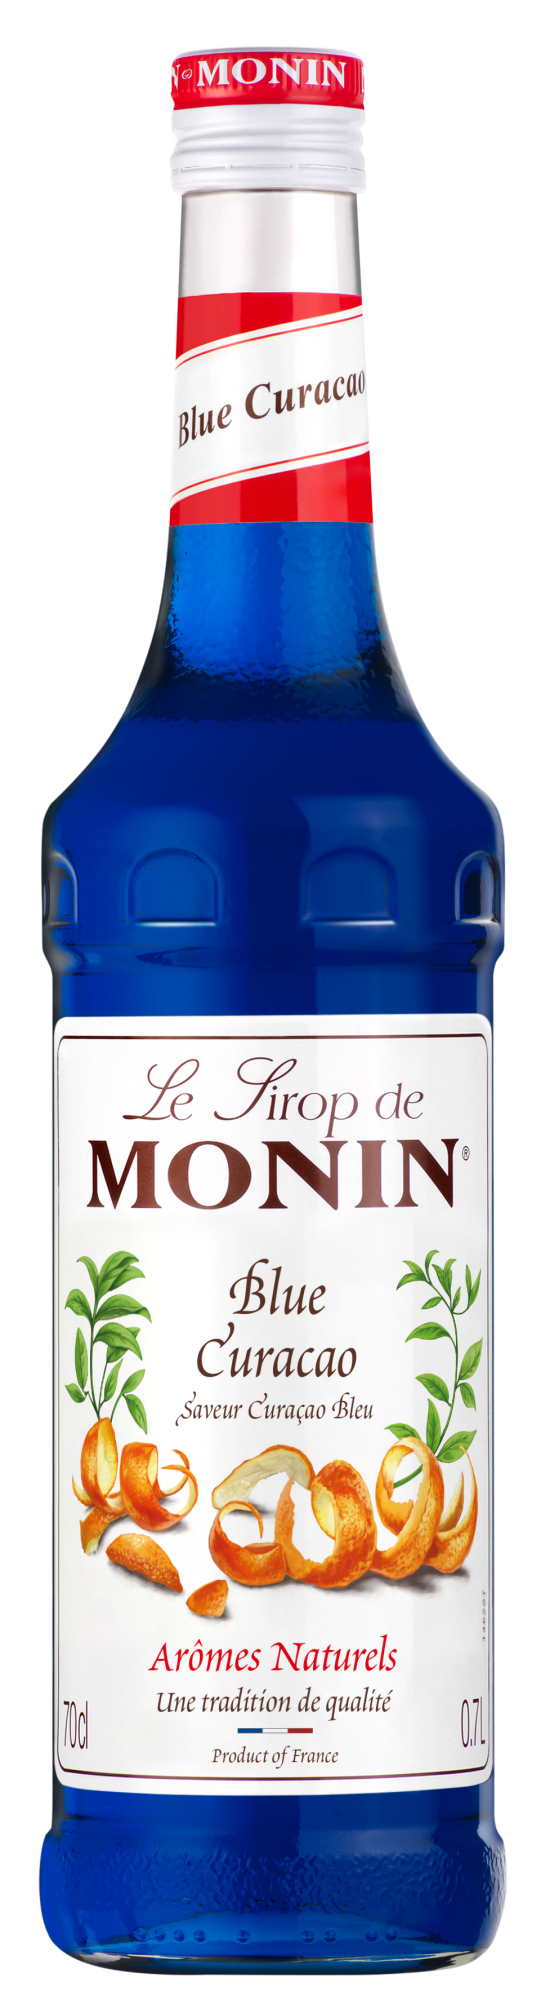 Buy MONIN Blue Curacao Syrup. It captures the rich, zesty notes of orange peel with an memorable blue colour.